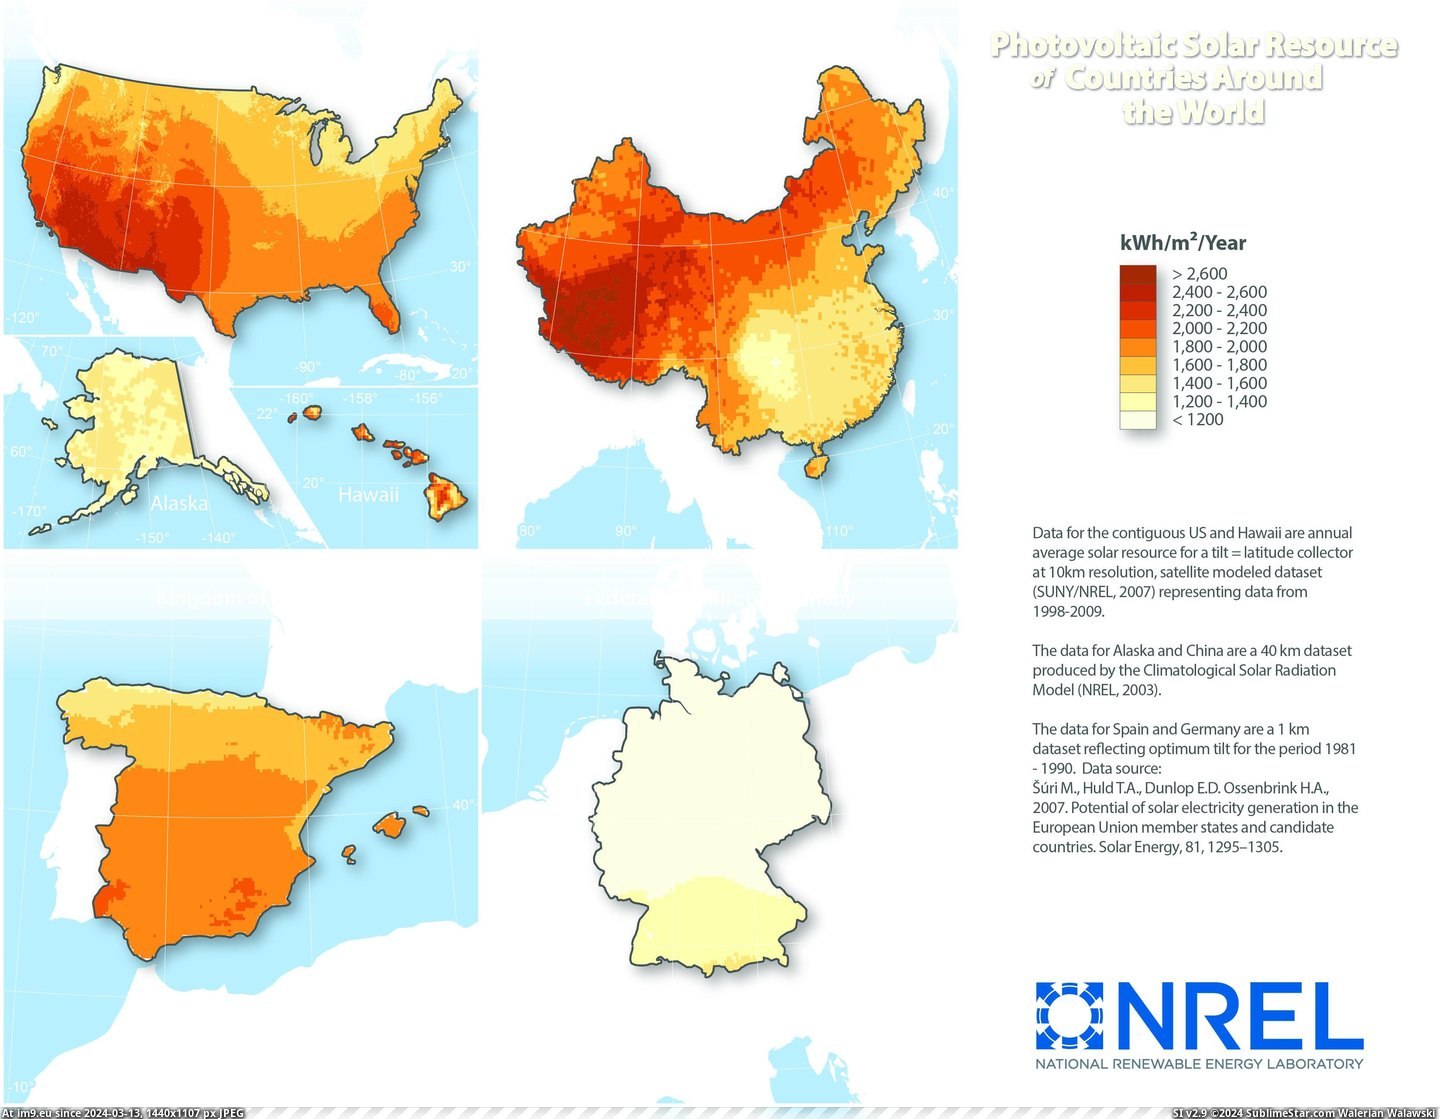 #World #Countries #Photovoltaic #Solar #Resource [Mapporn] Photovoltaic solar resource of countries around the world [3300×2550] Pic. (Image of album My r/MAPS favs))